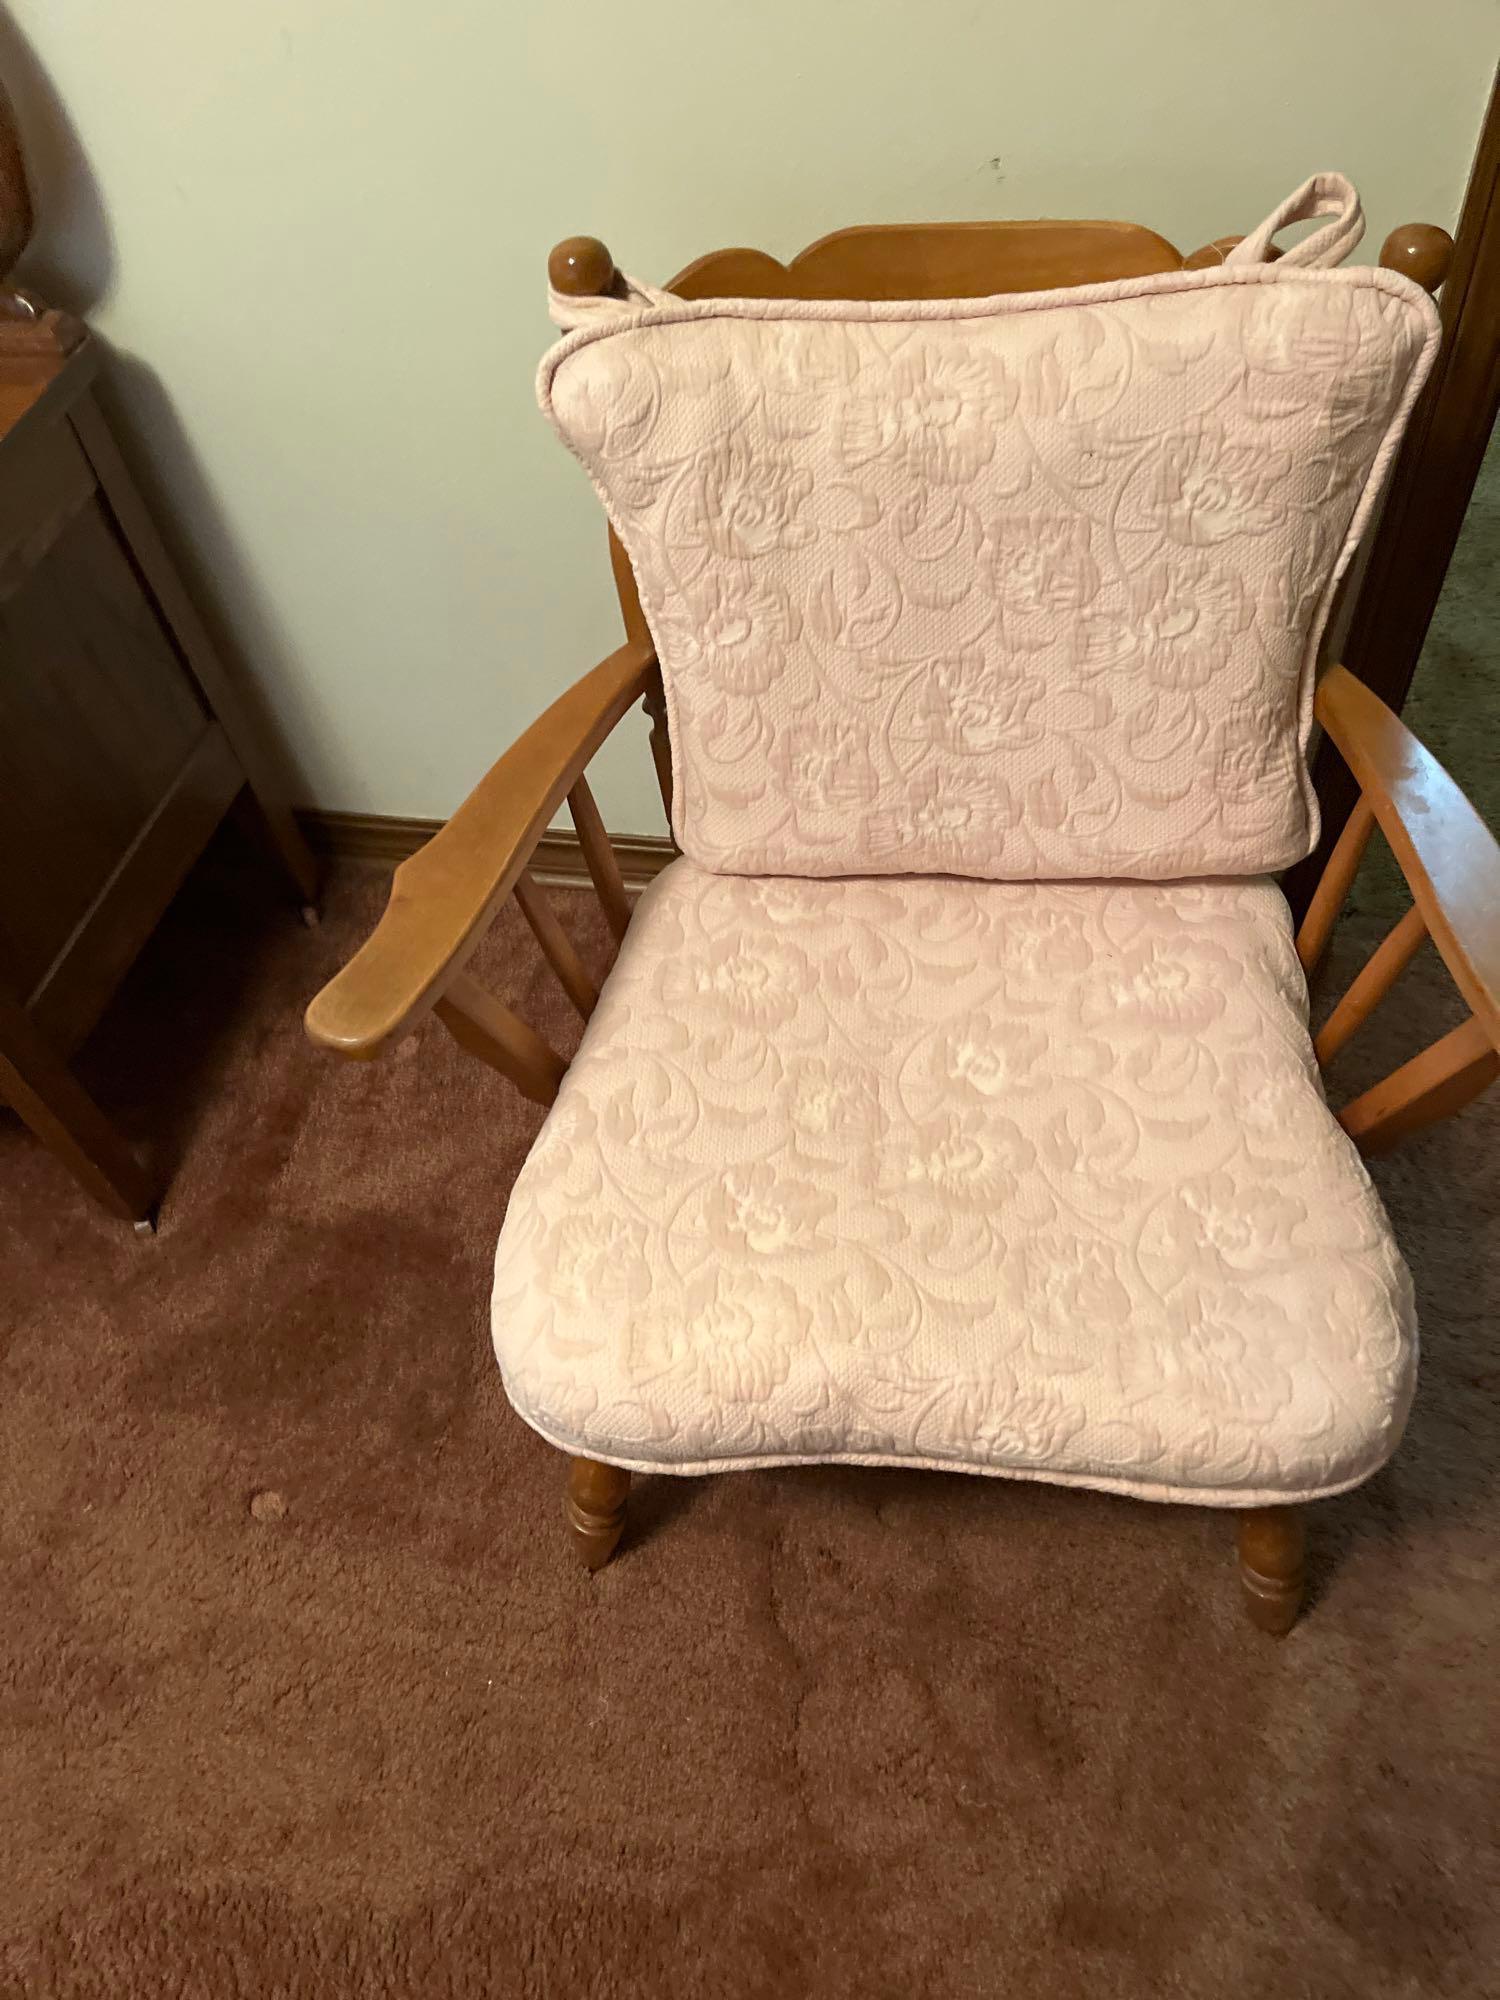 Chair and rug